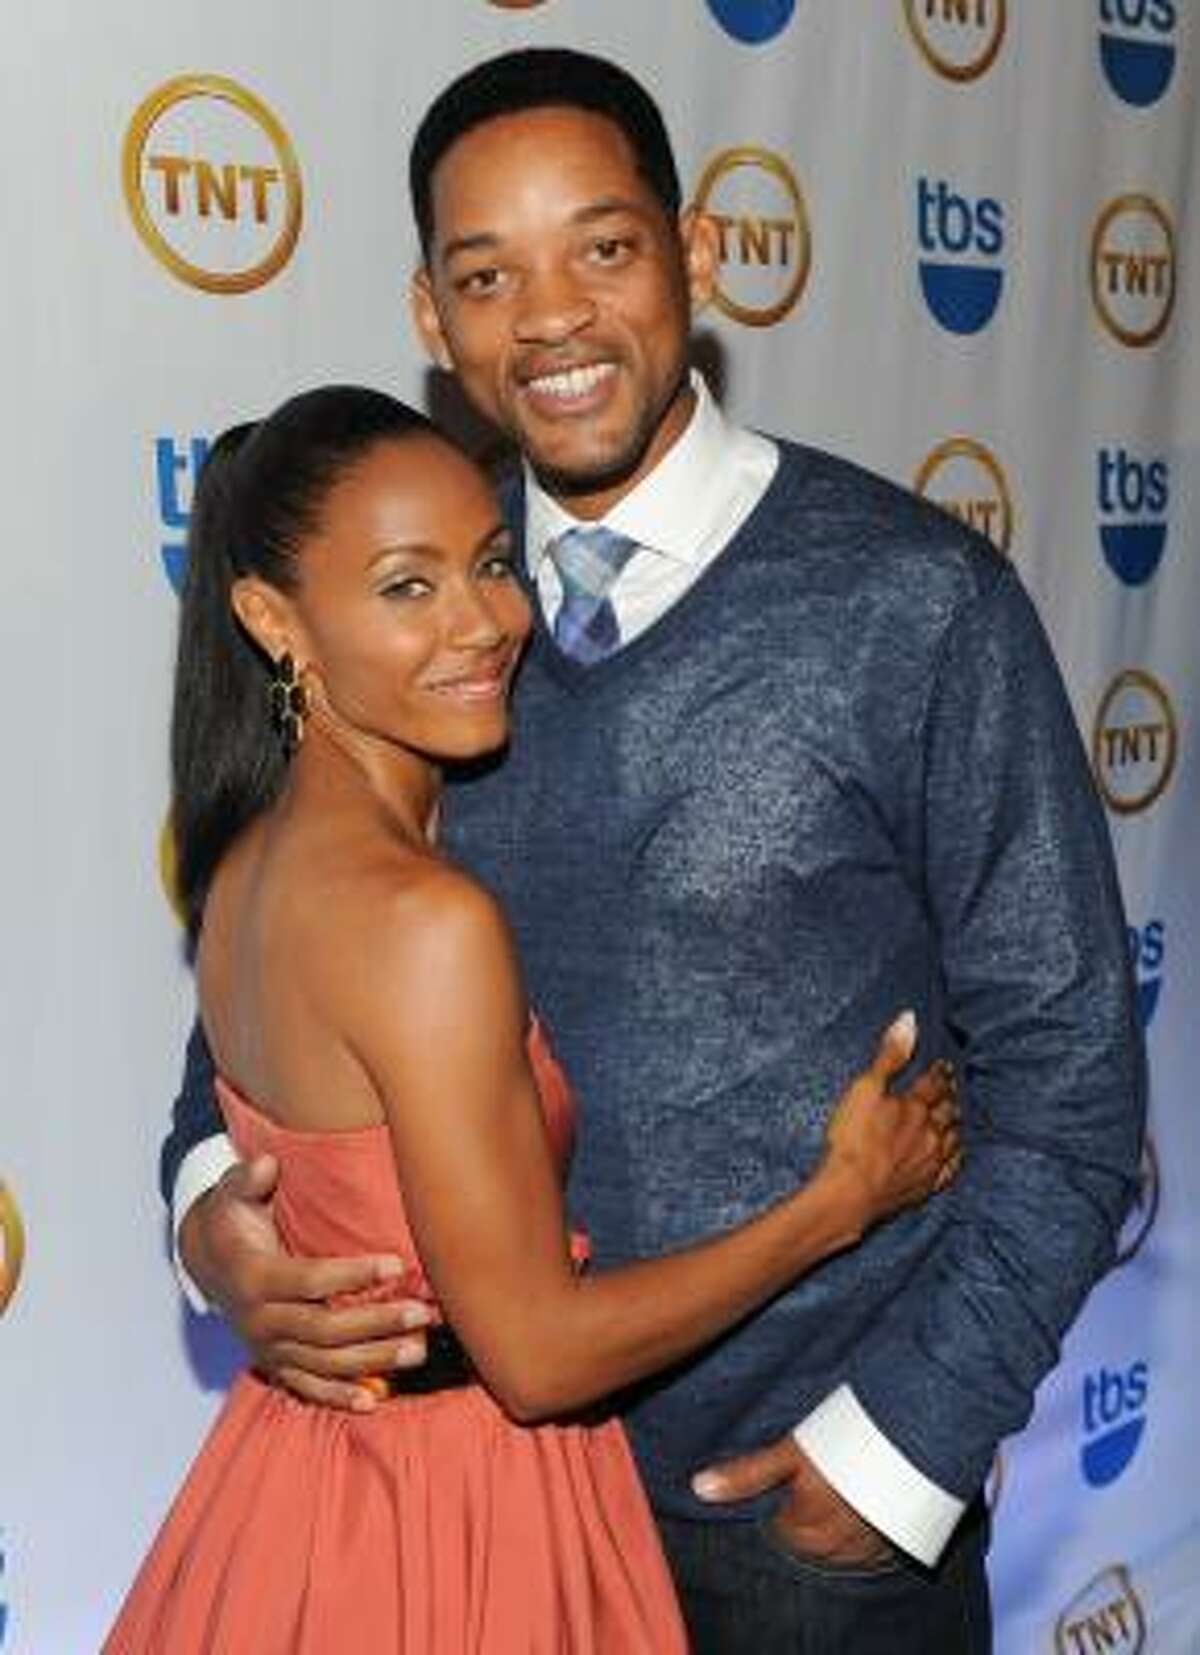 Will Smith and Jada Pinkett-Smith have been very open about their marriage "arrangement." He revealed to UK magazine Reveal, "In our marriage vows, we didn't say 'forsaking all others'. We said 'you will never hear I did something afterwards'. Because if that happens the relationship is destroyed."